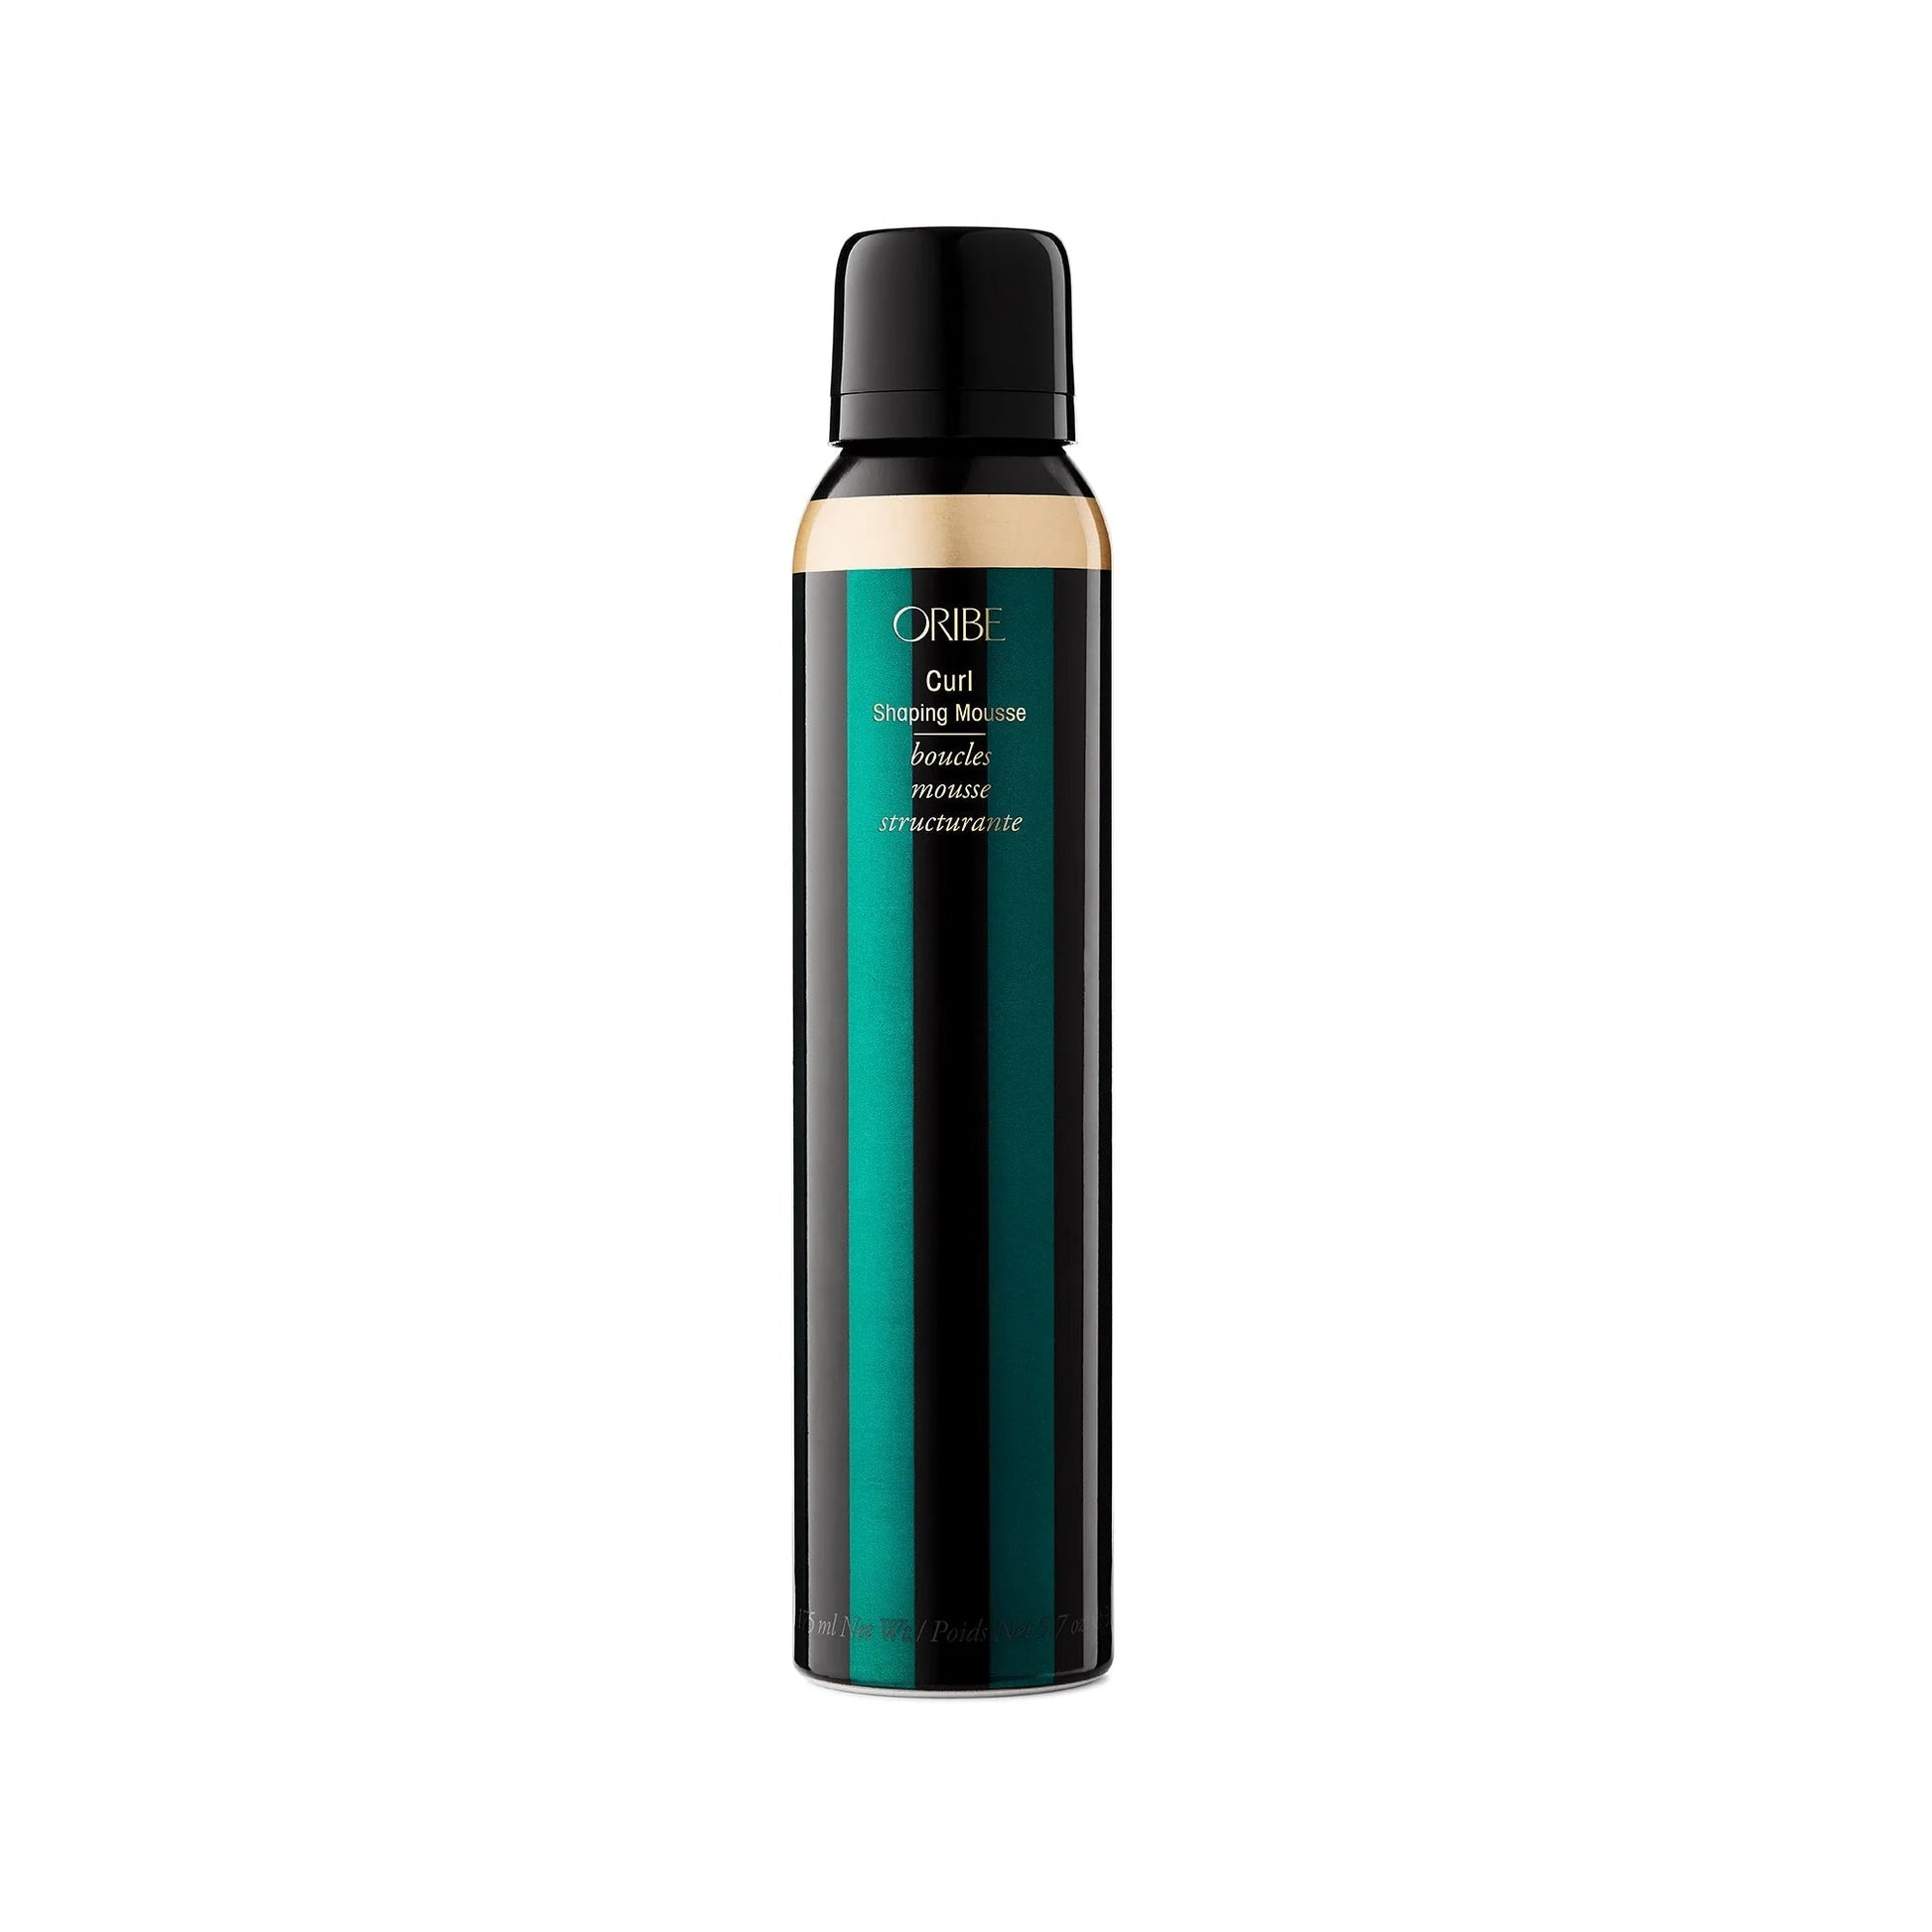 Oribe Curl Shaping Mousse - shelley and co